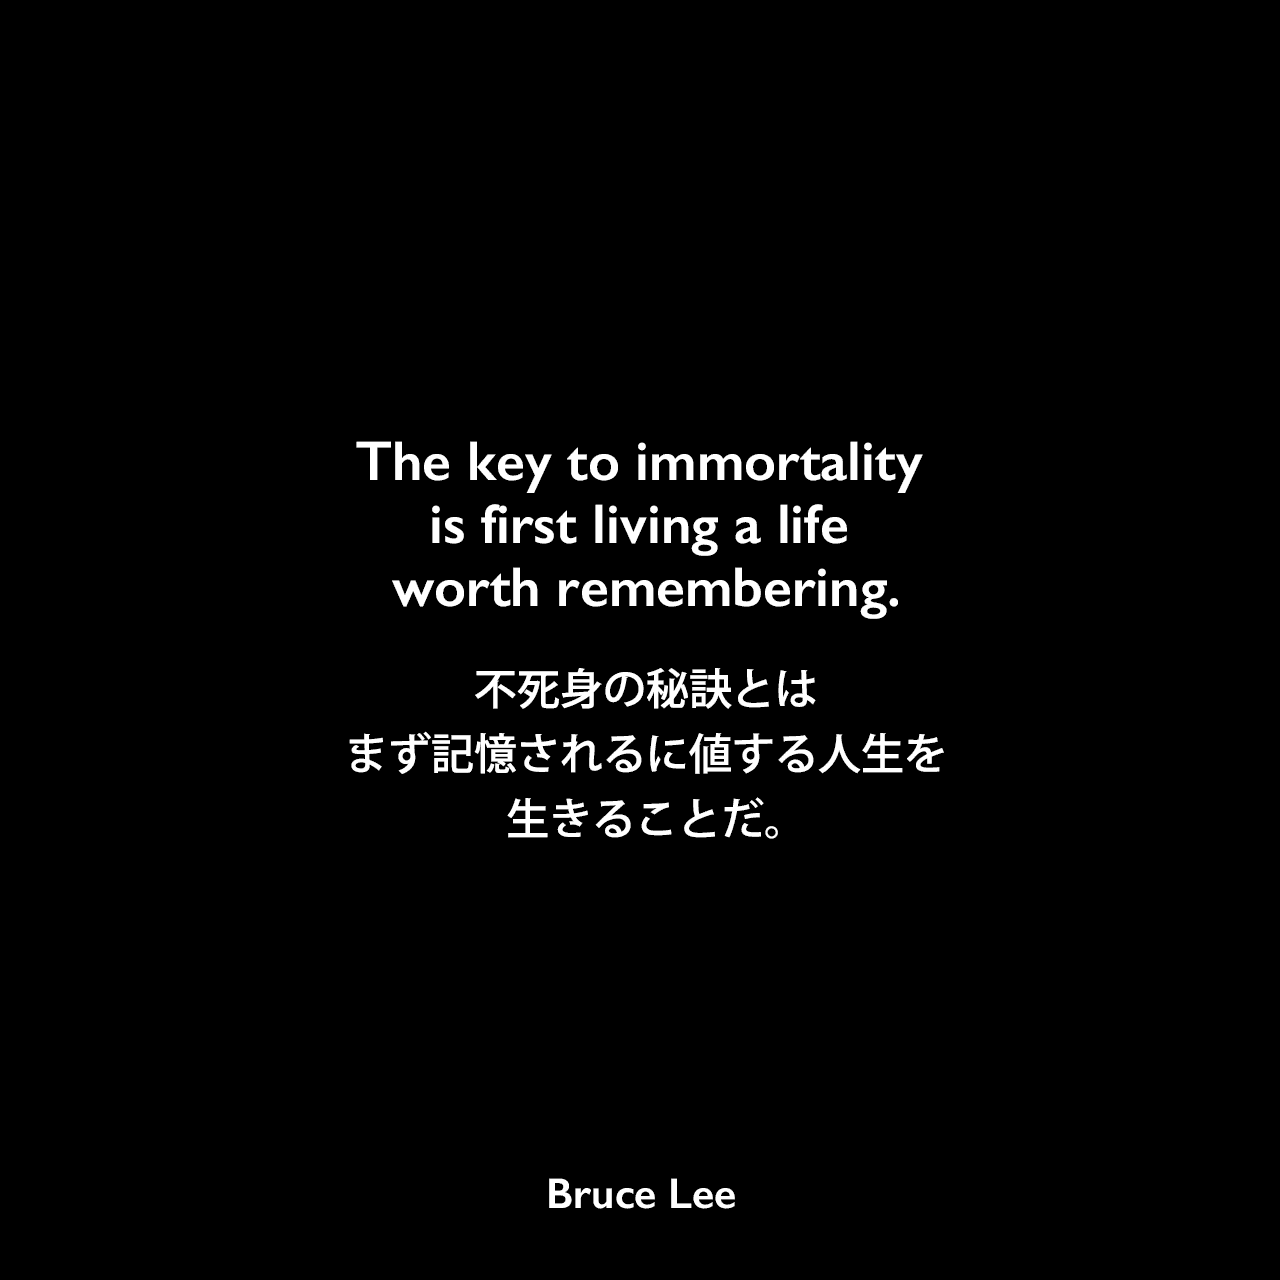 The key to immortality is first living a life worth remembering.不死身の秘訣とは、まず記憶されるに値する人生を生きることだ。